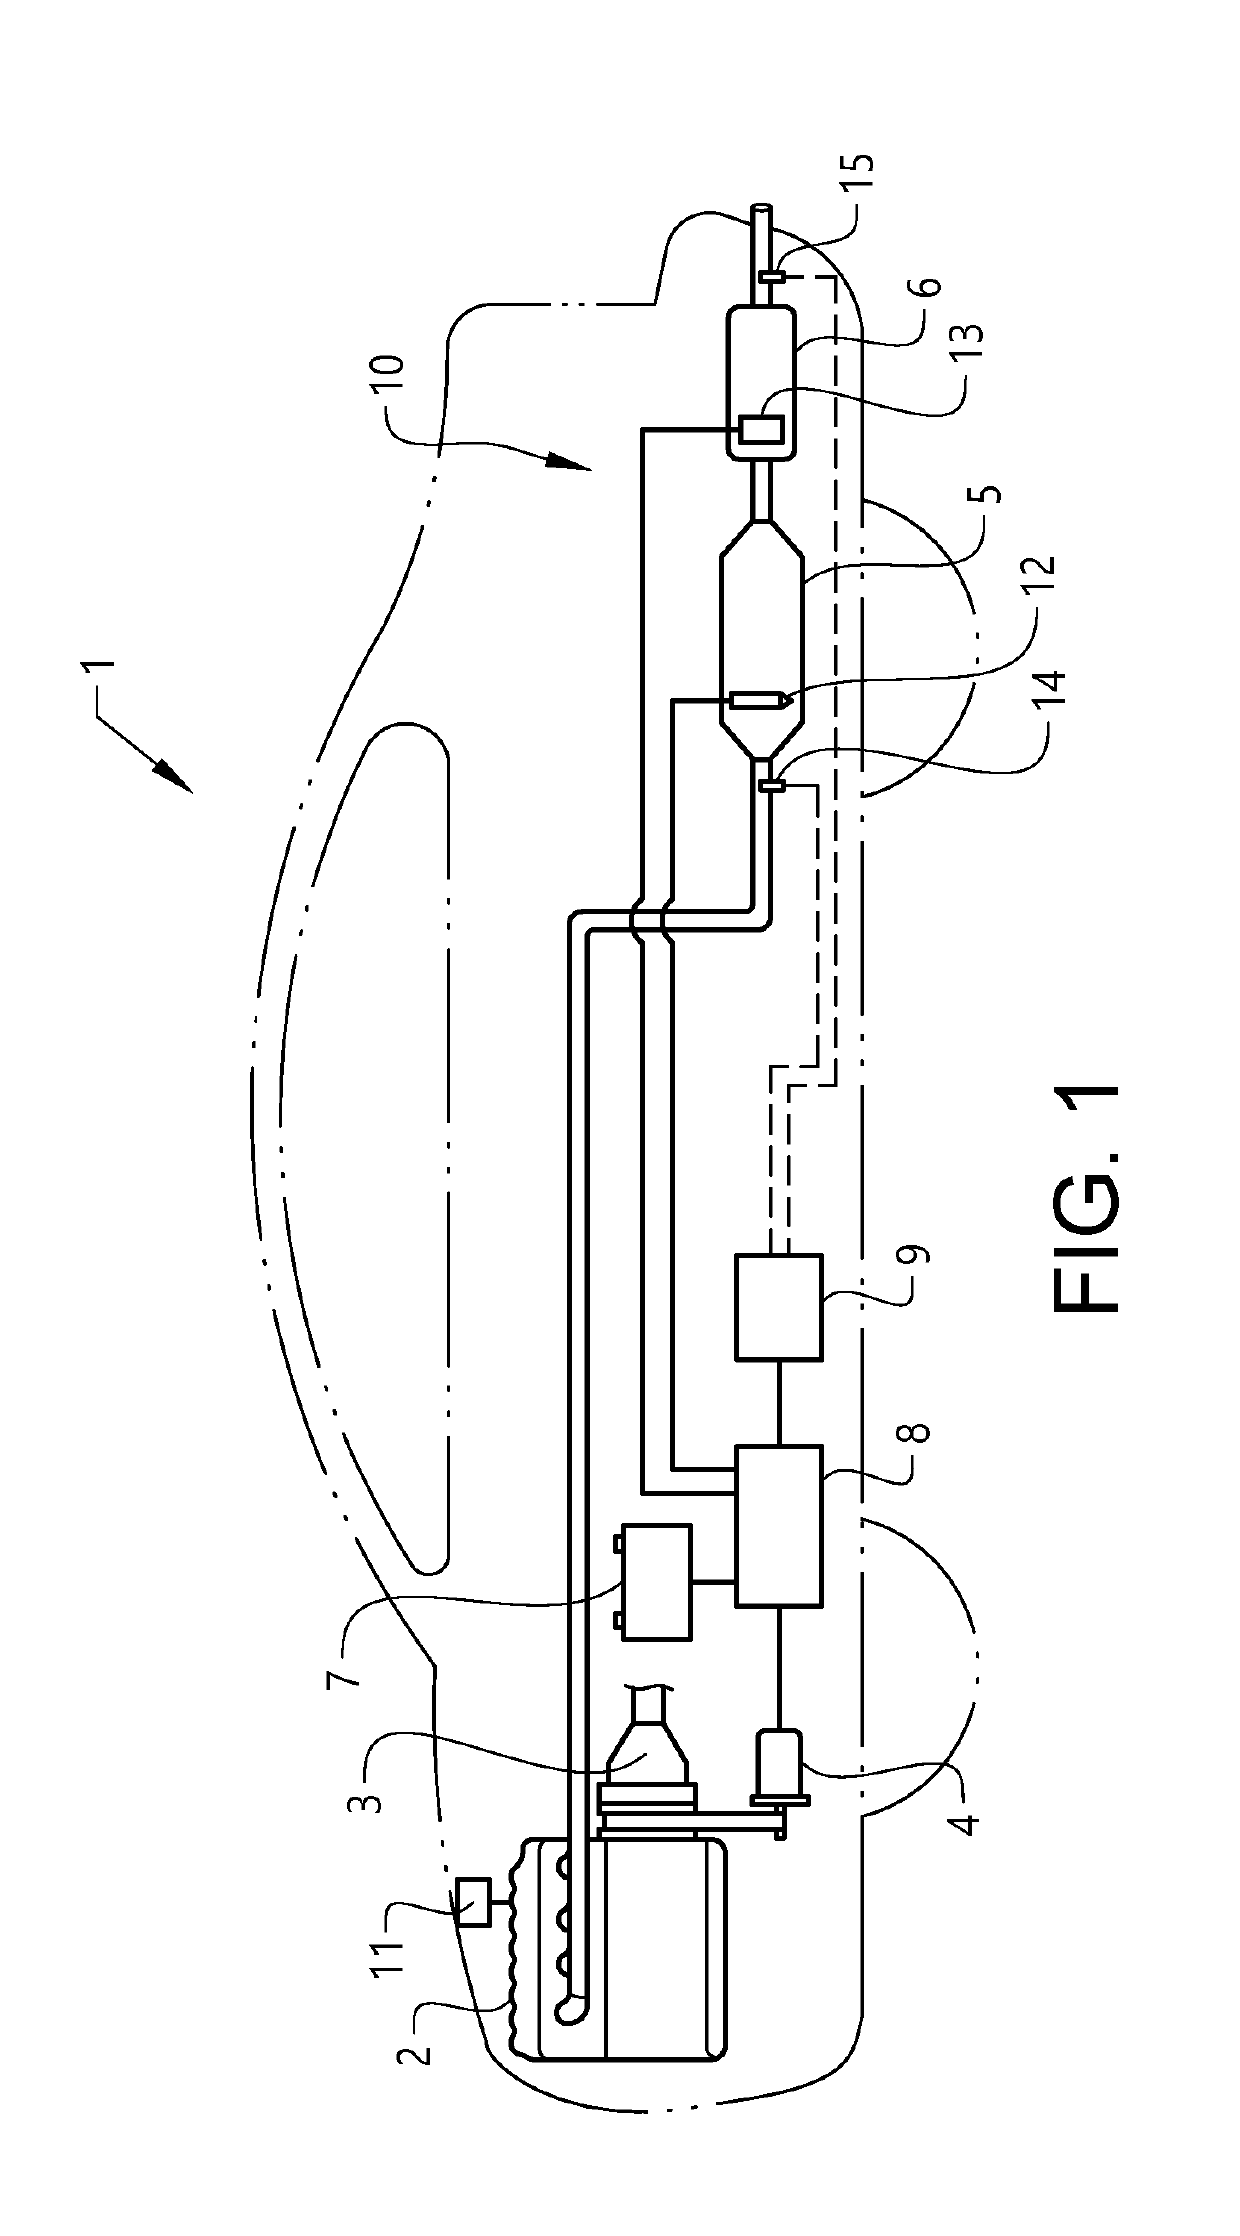 Method for heating an exhaust aftertreatment system and a hybrid vehicle adapted to heat an exhaust aftertreatment system